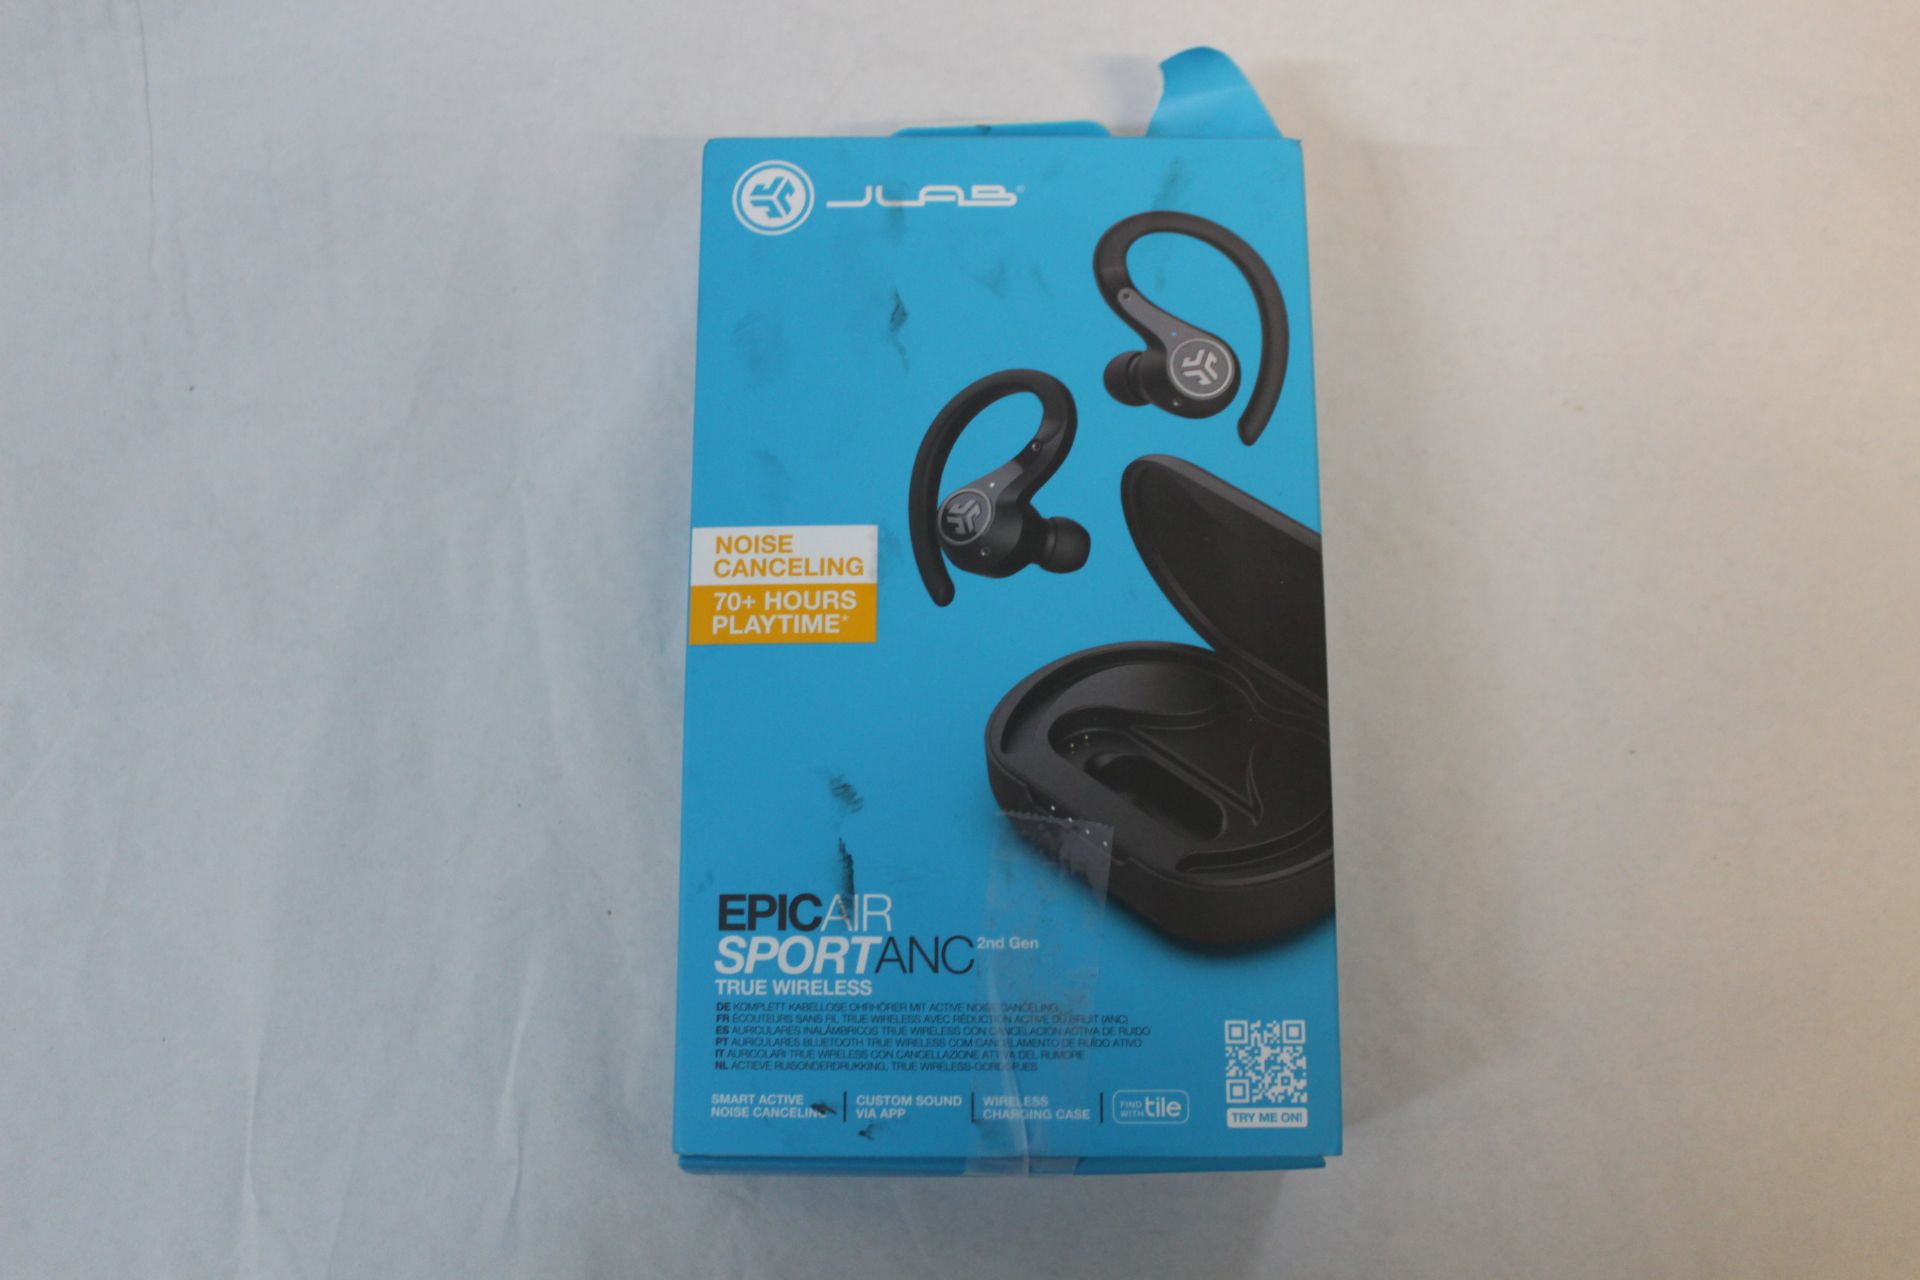 1 BOXED JLAB EPIC AIR SPORT ANC TRUE WIRELESS EARBUDS IN BLACK RRP Â£79.99